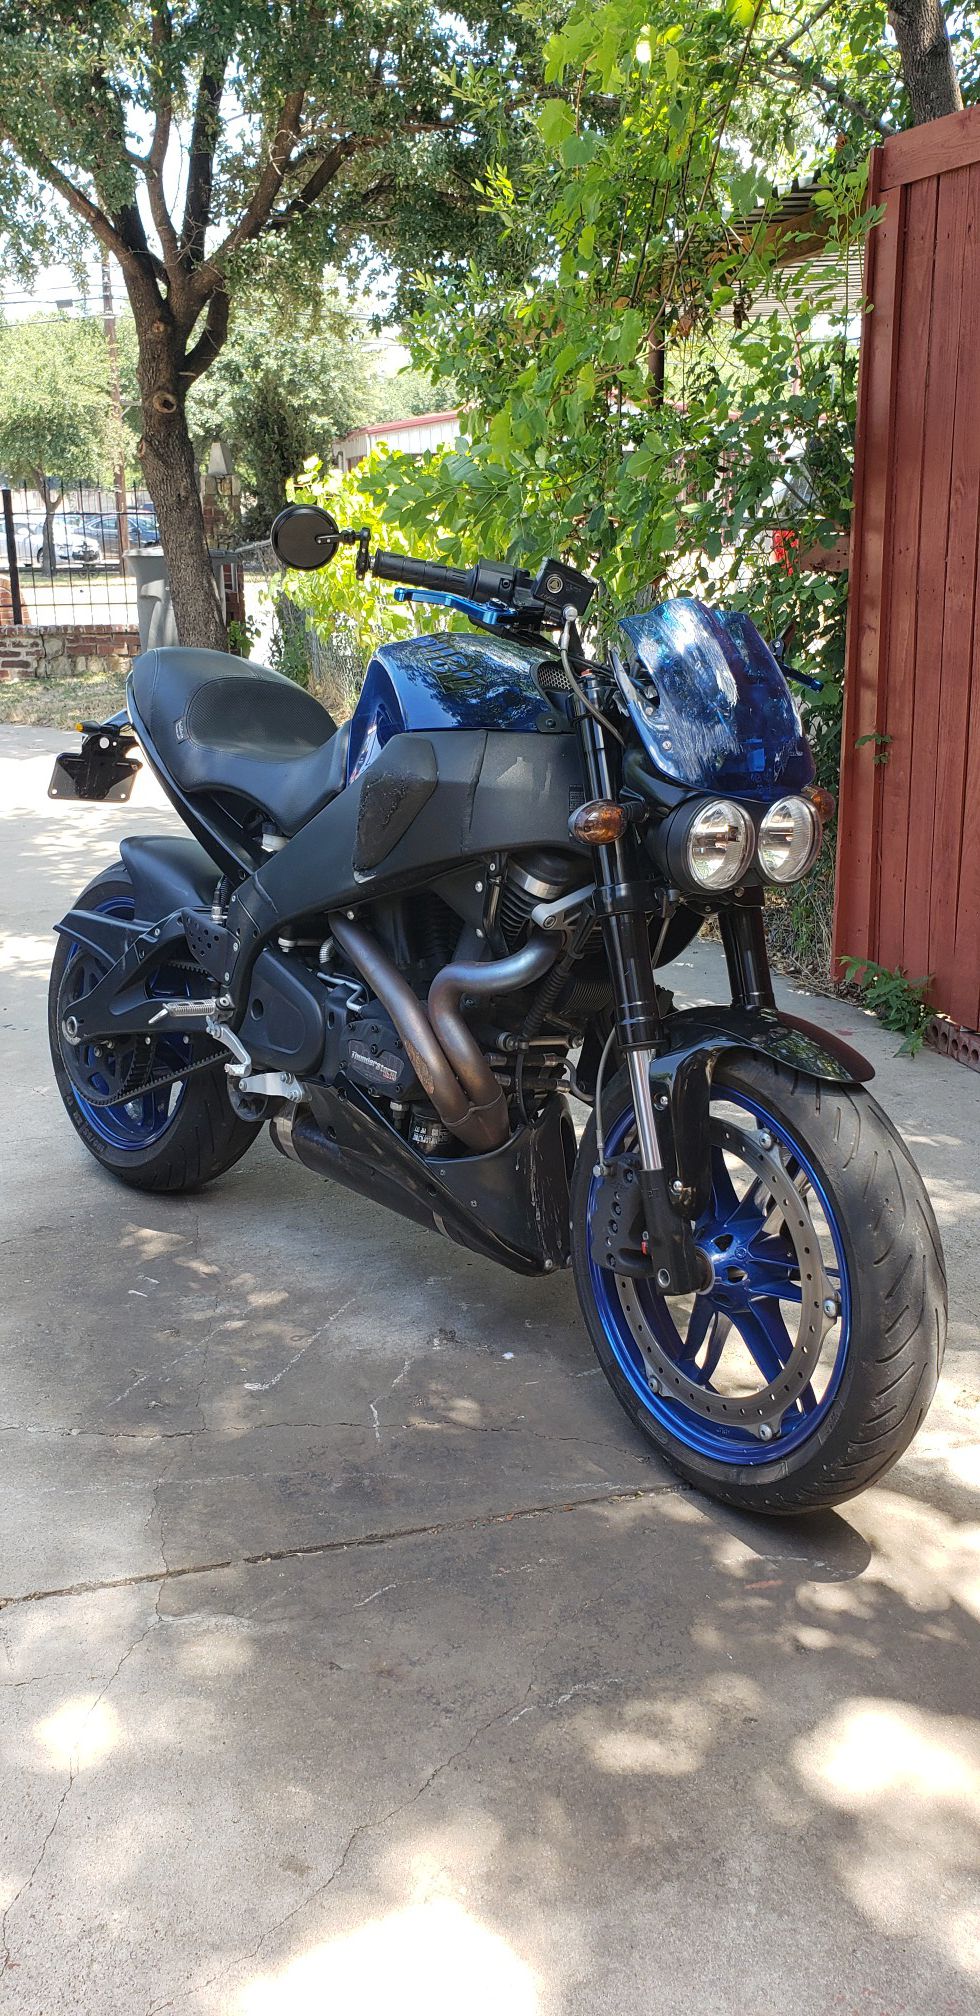 2008 Buell for sale! Low miles runs great!